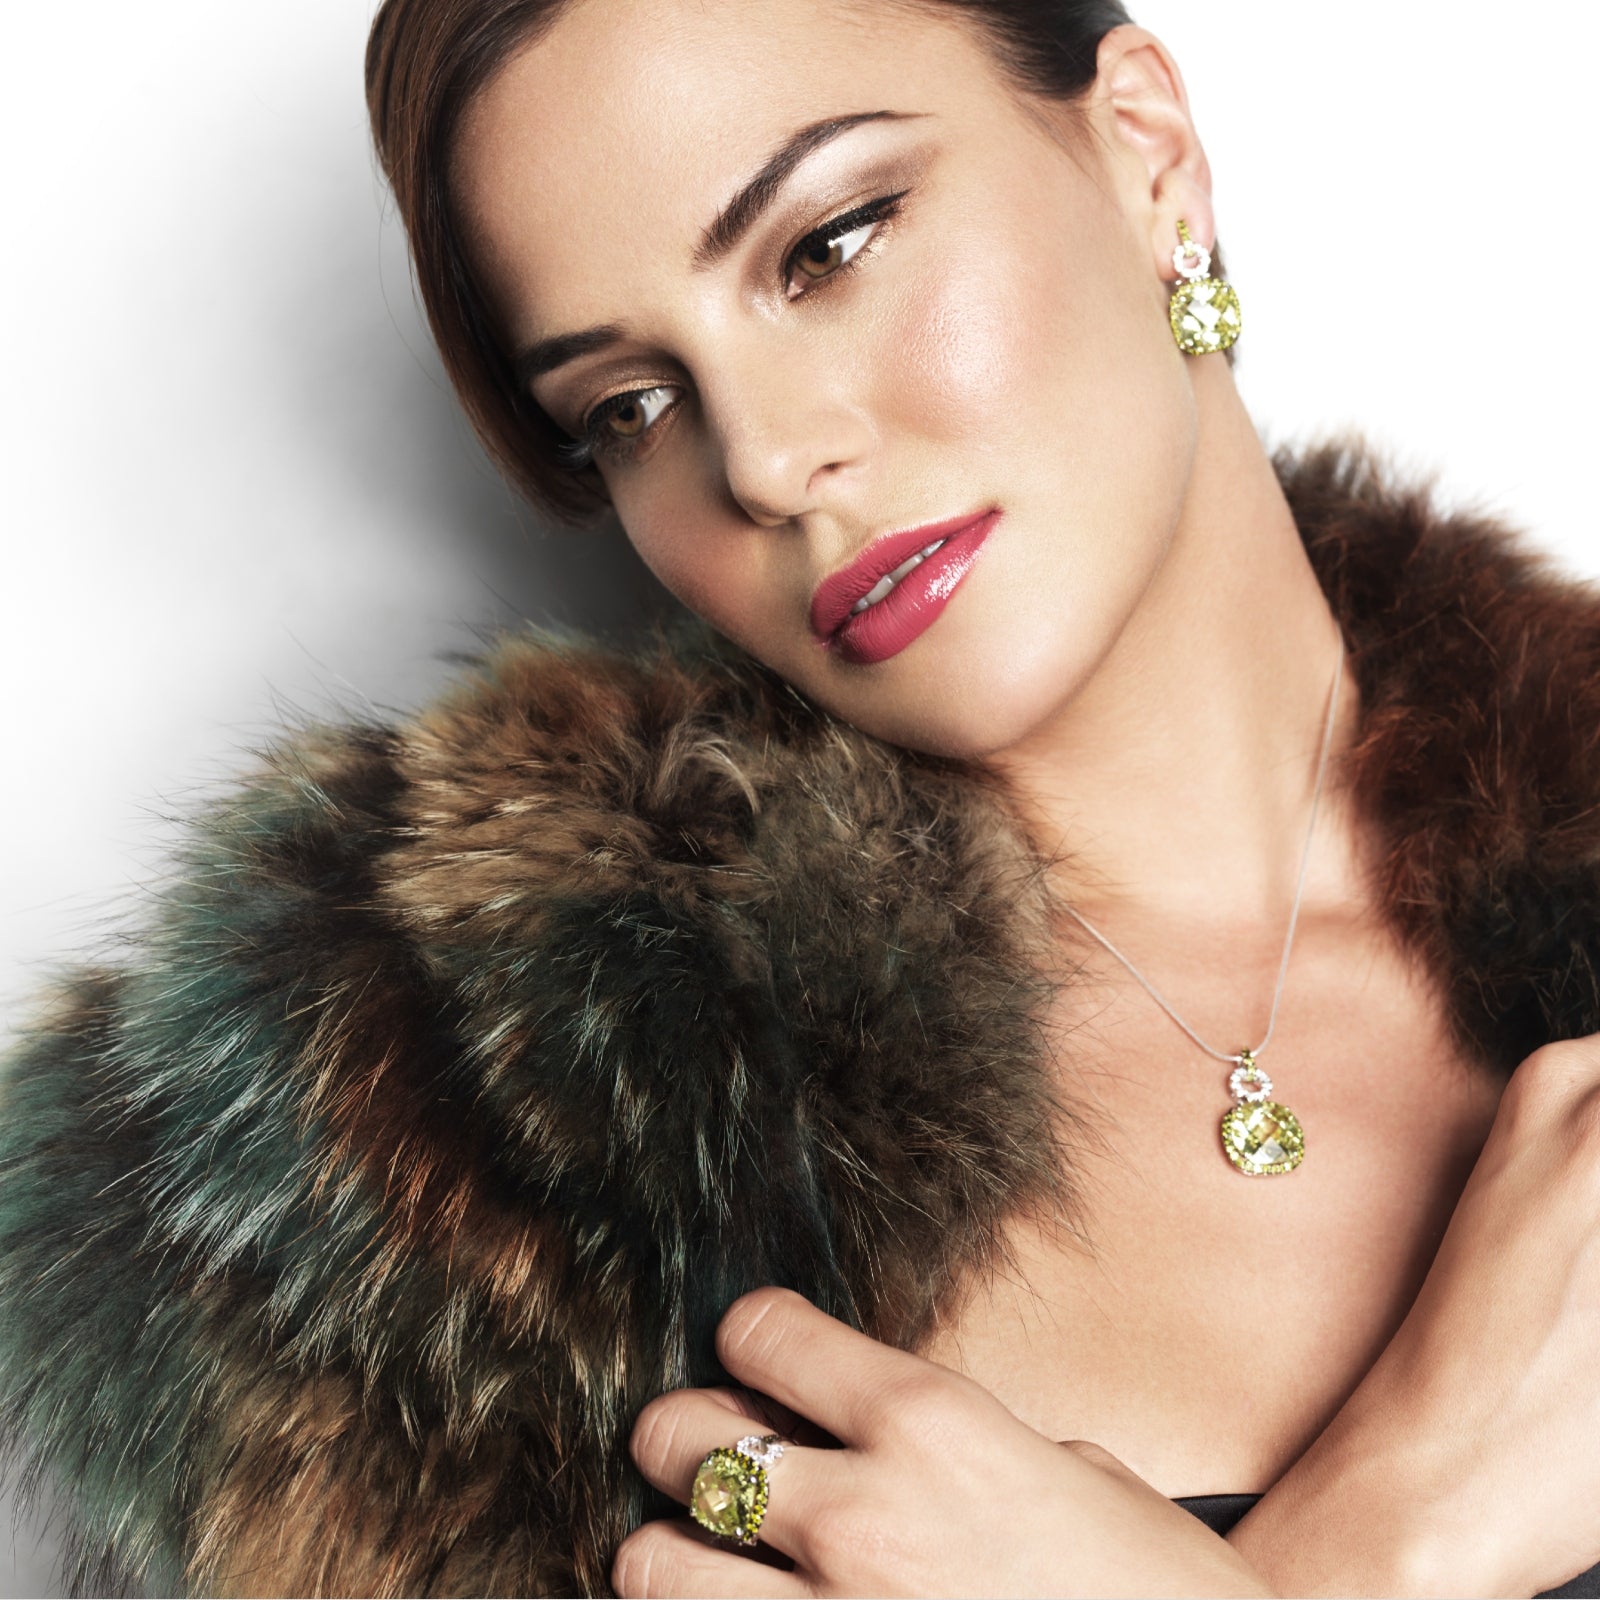 Taylor Vintage Jewellery Collection by Bellagio & Co. Worldwide shipping from Australia.